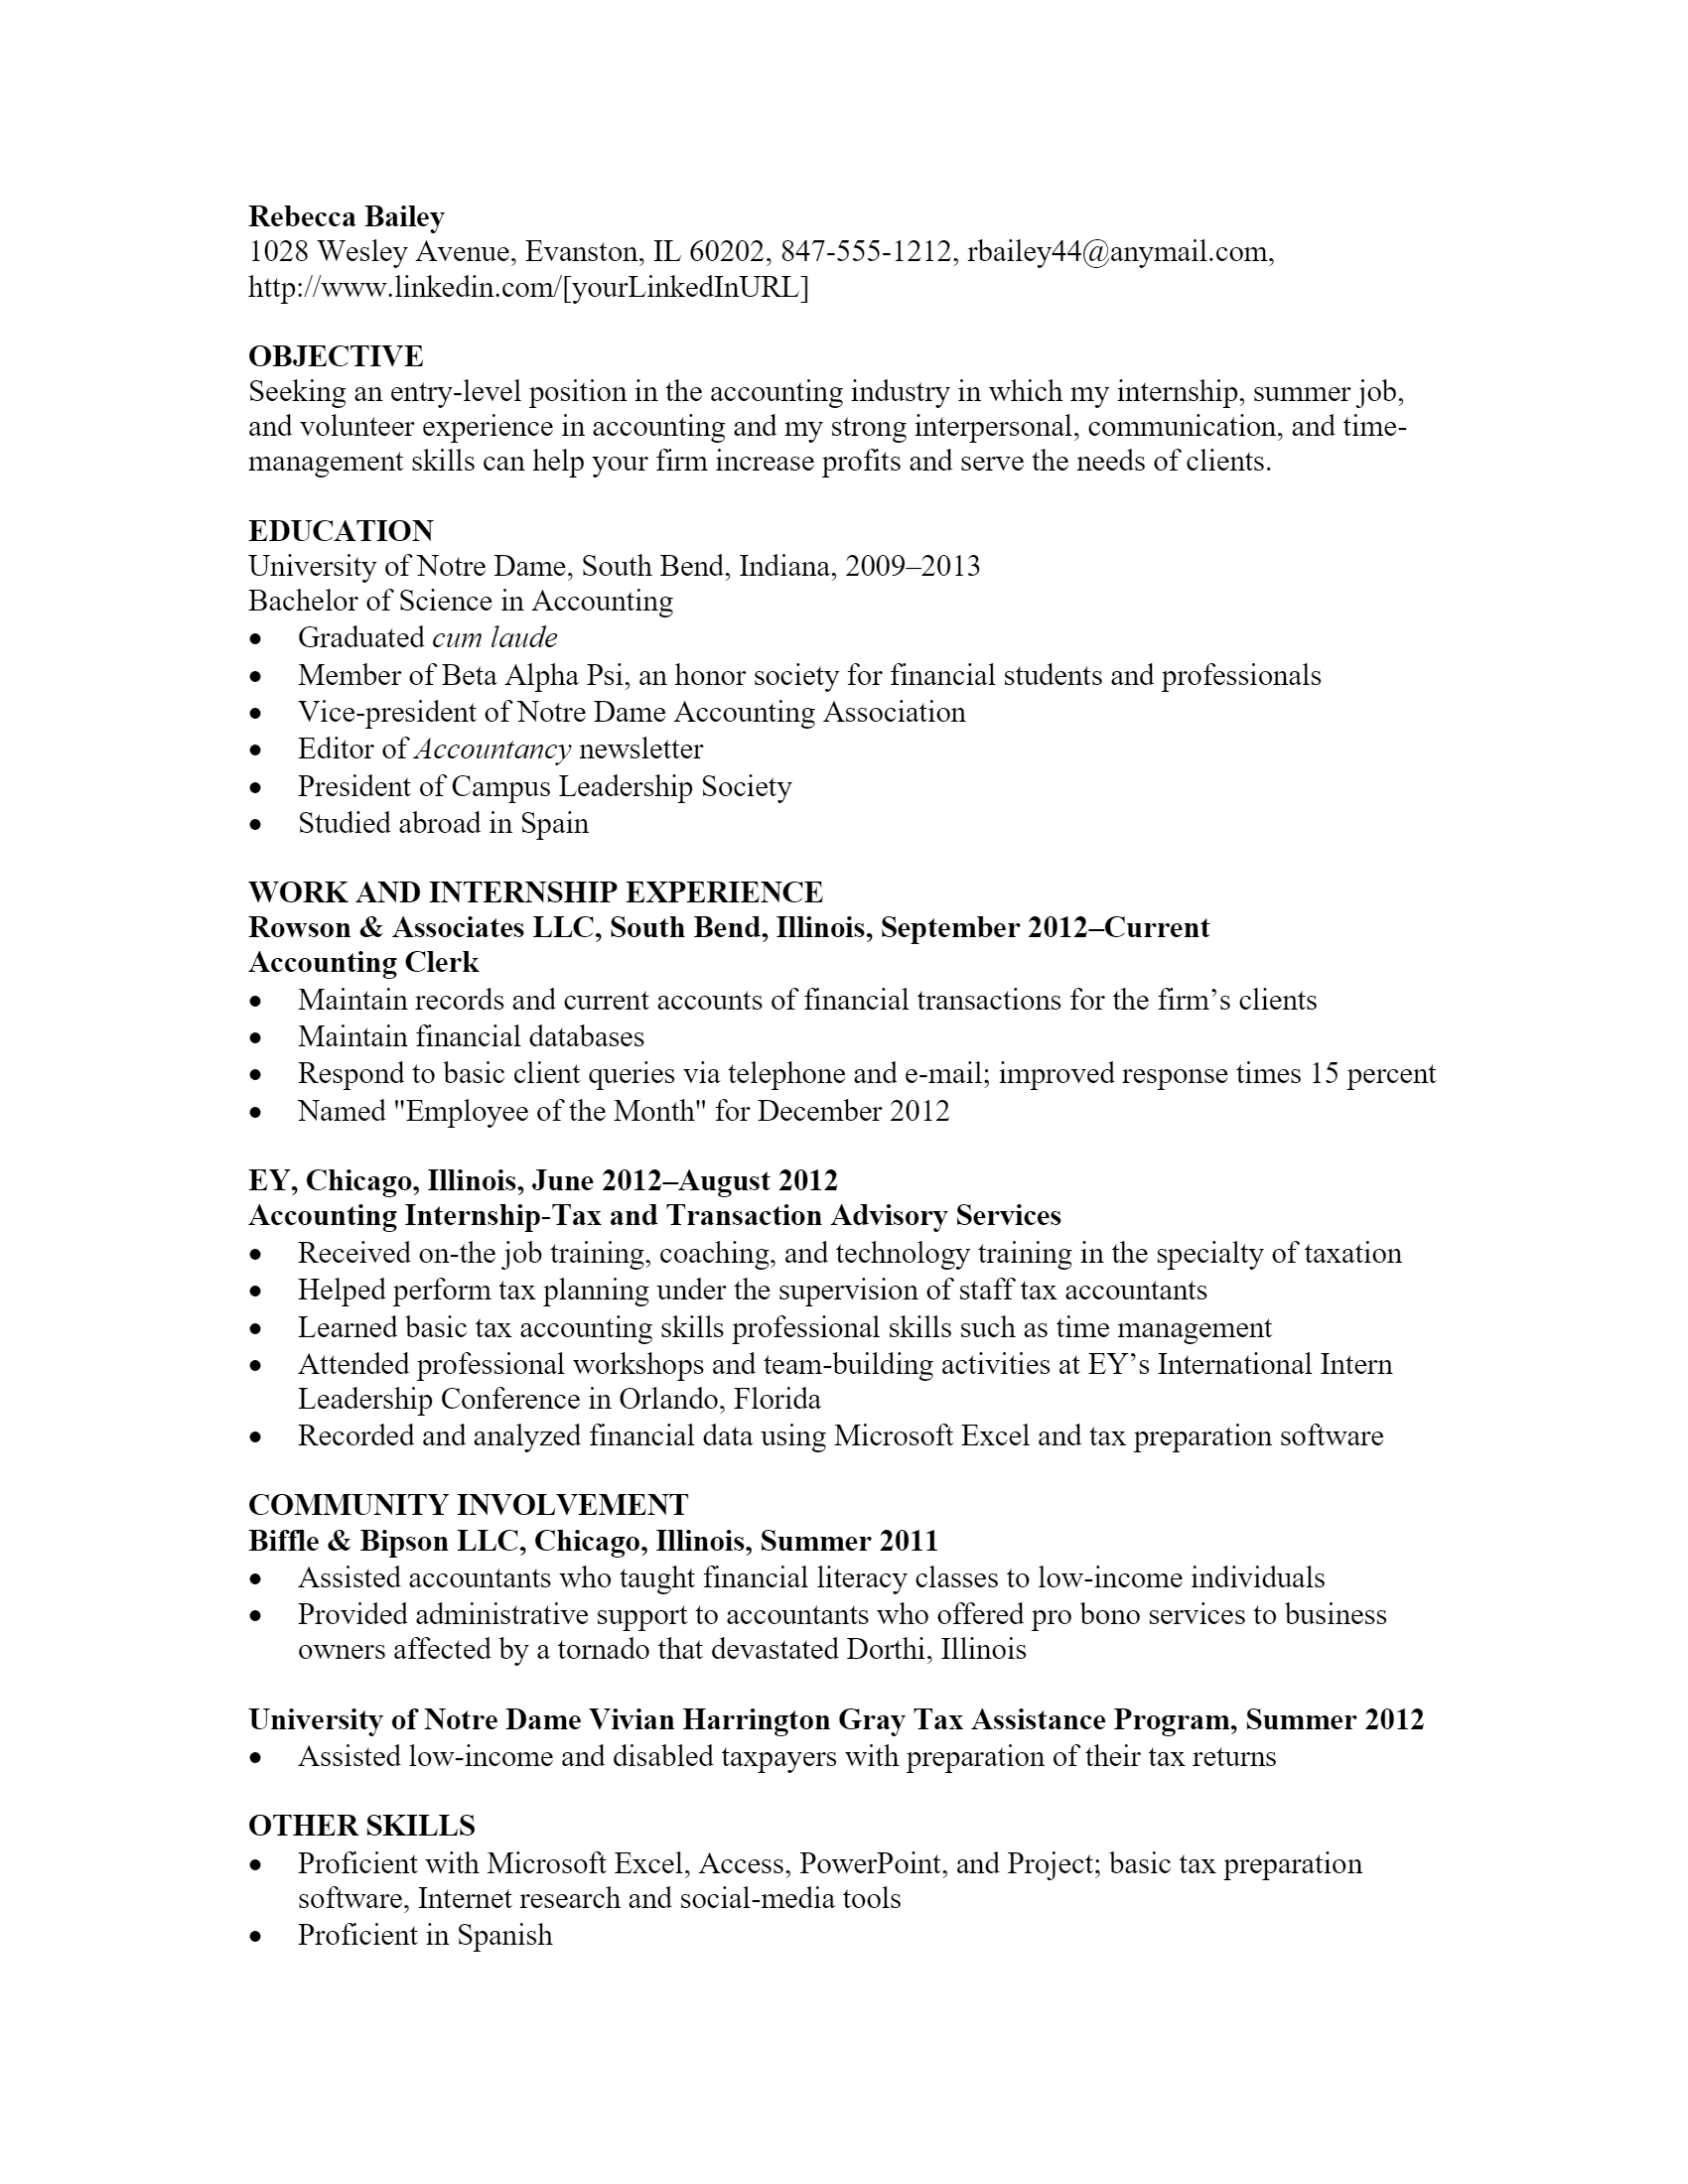 Entry-level Accountant Resume .Docx (Word)